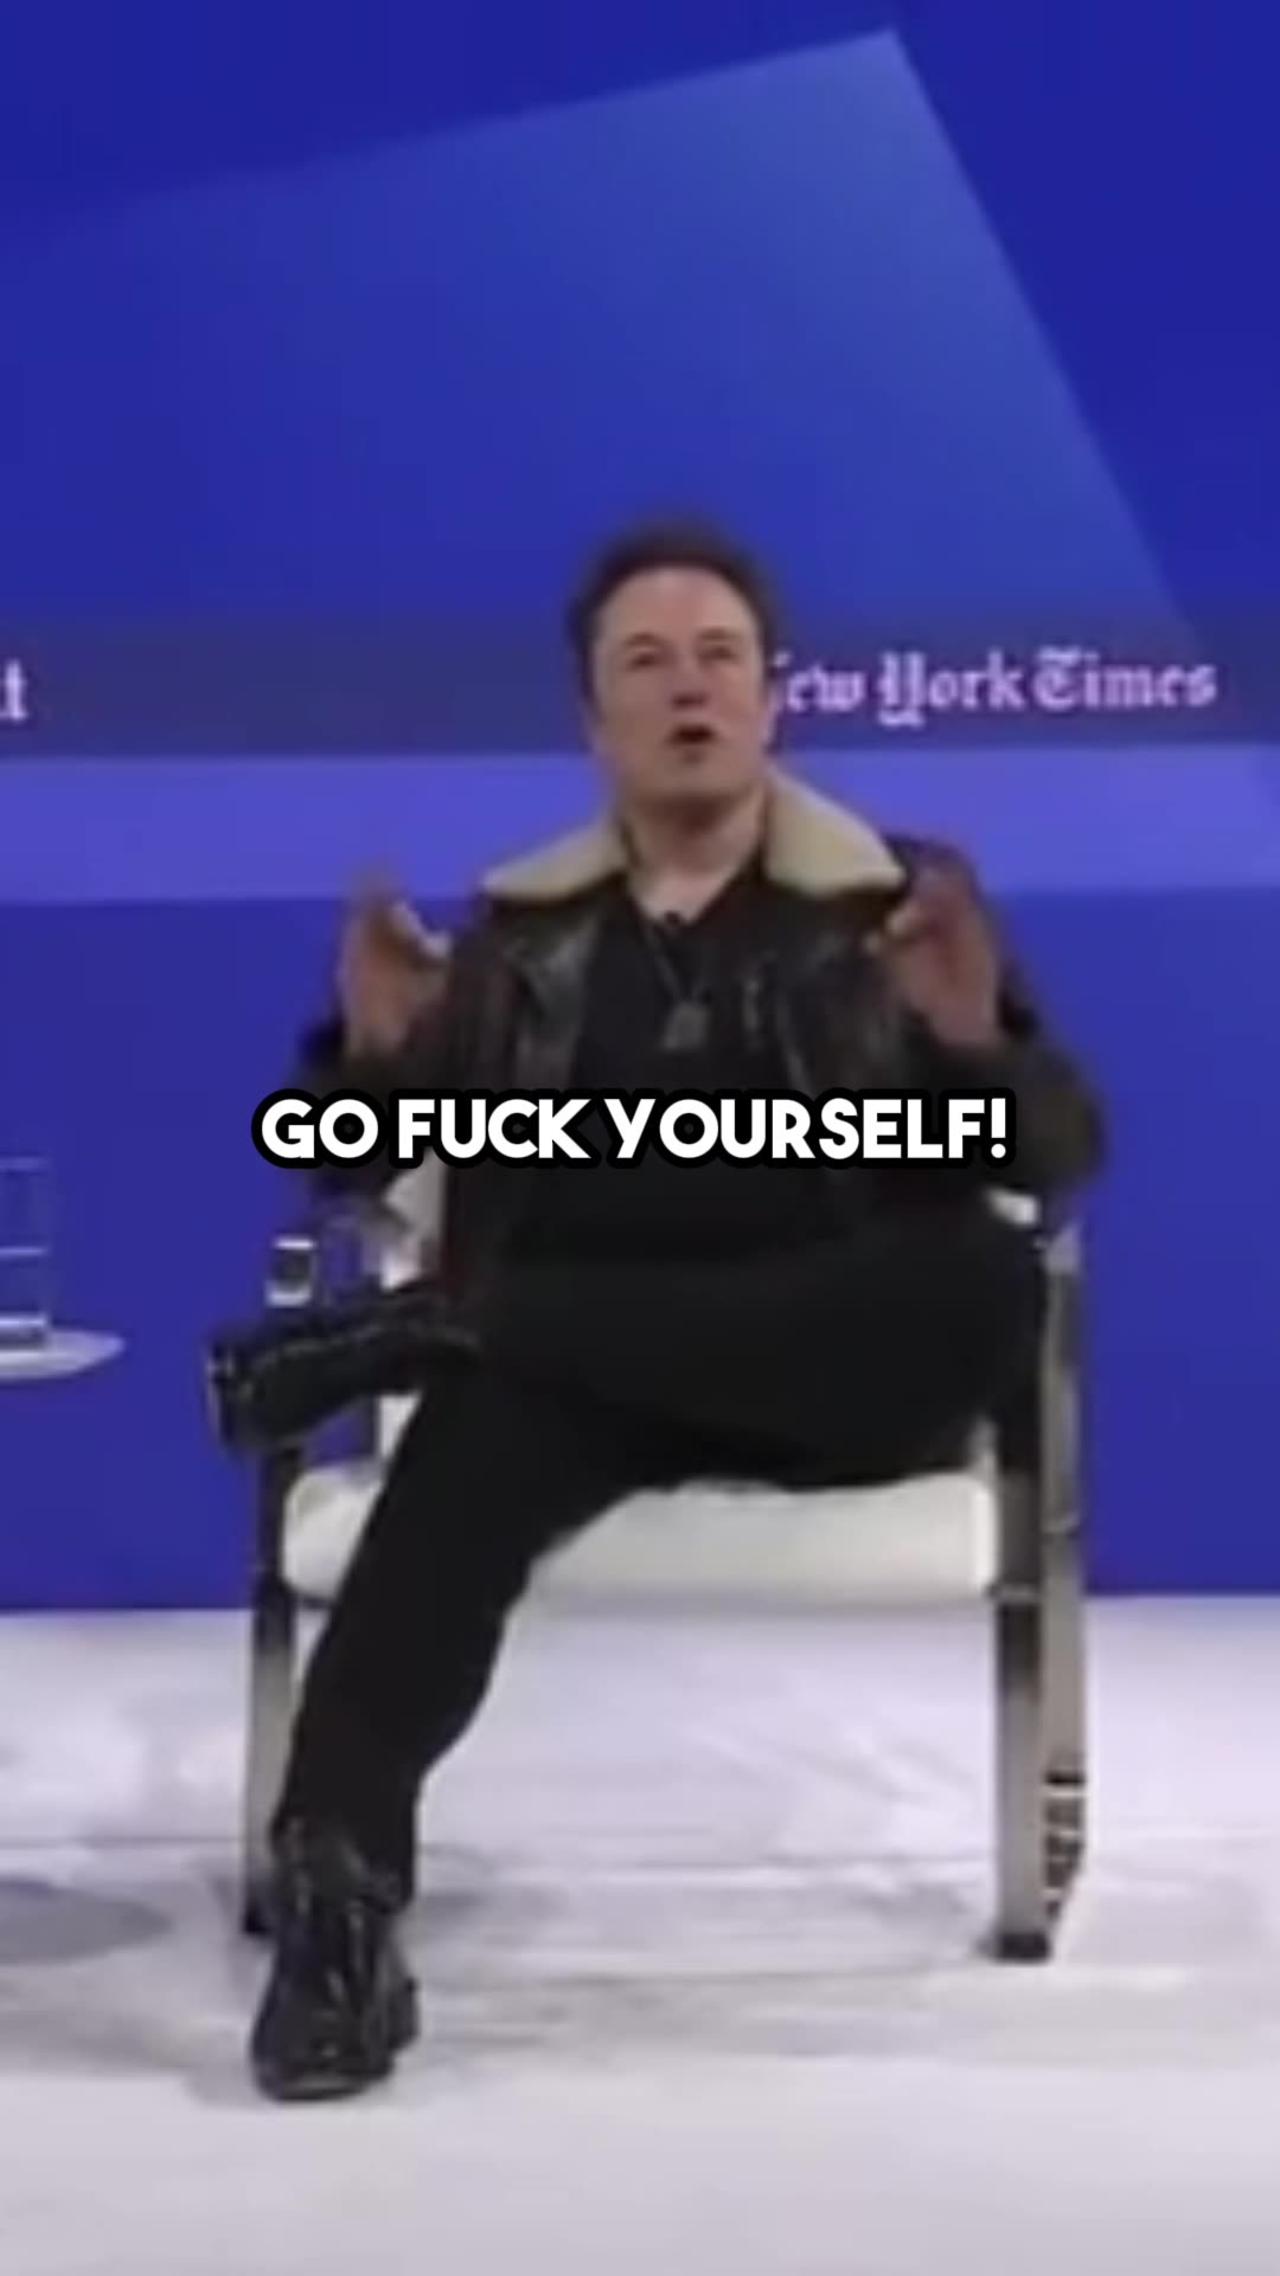 Elon Musk tells advertisers who are trying to blackmail him to "go fu*k yourself." 😆😆